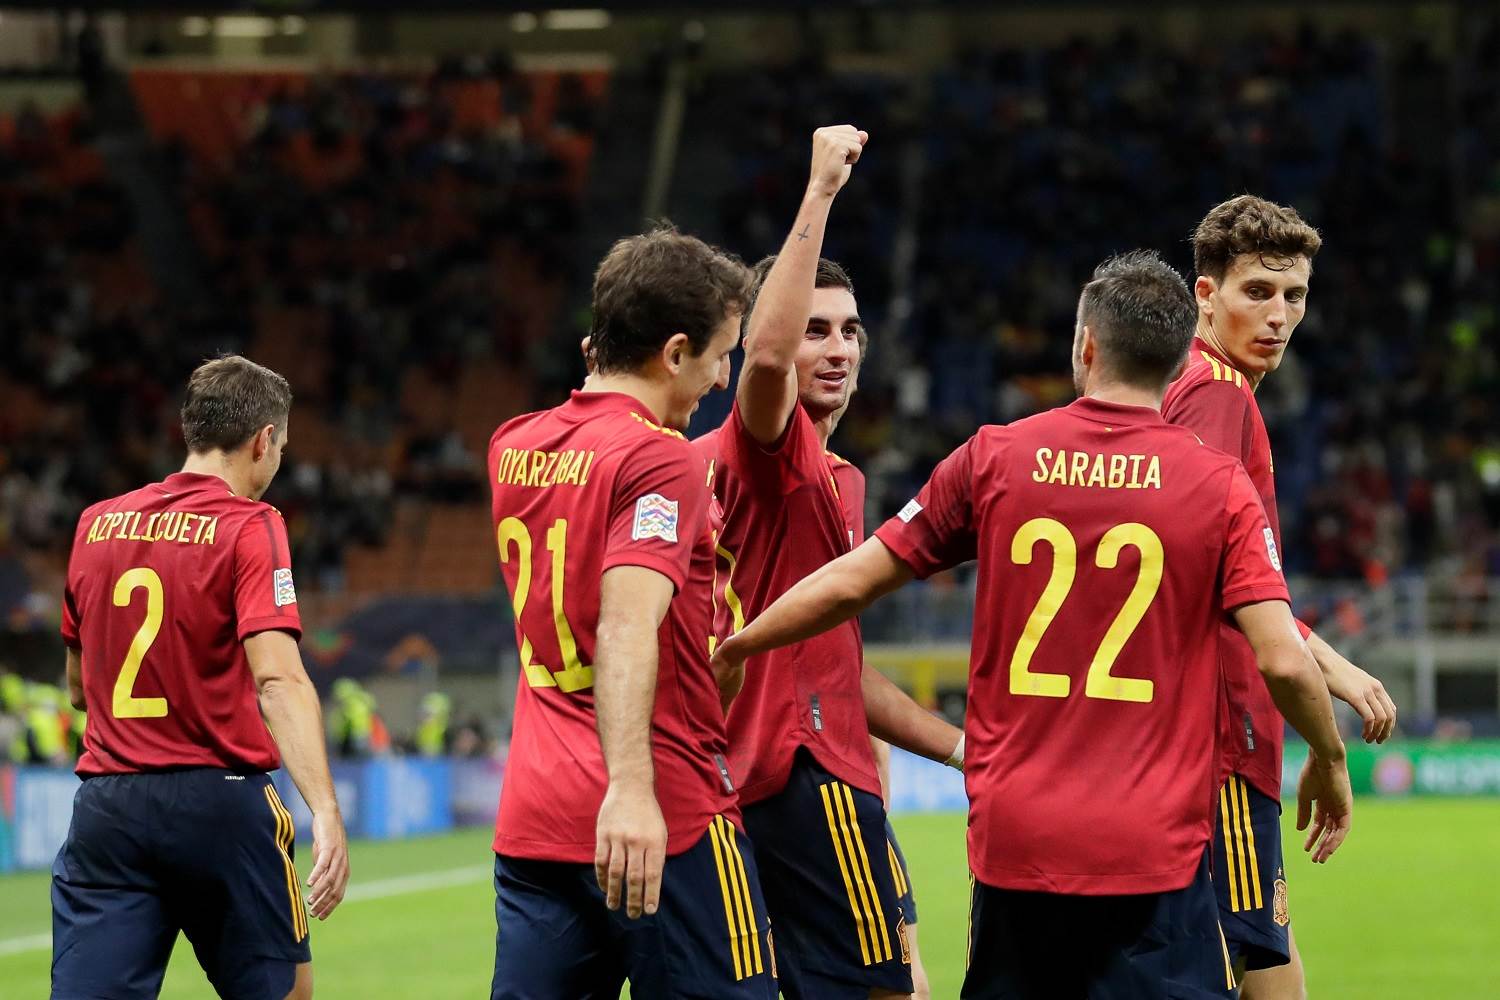 Spain 2-1 Italy 2023.06.15 Extended Highlights, UEFA Nations League Goals Highlight, Watch video Spain 2-1 Italy highlights, Watch highlights Spain 2-1 Italy, Video bàn thắng Spain 2-1 Italy, Video trận đấu Spain 2-1 Italy, Spain 2-1 Italy goals, Spain Full Goals Highlight, Italy Full Goals Highlight